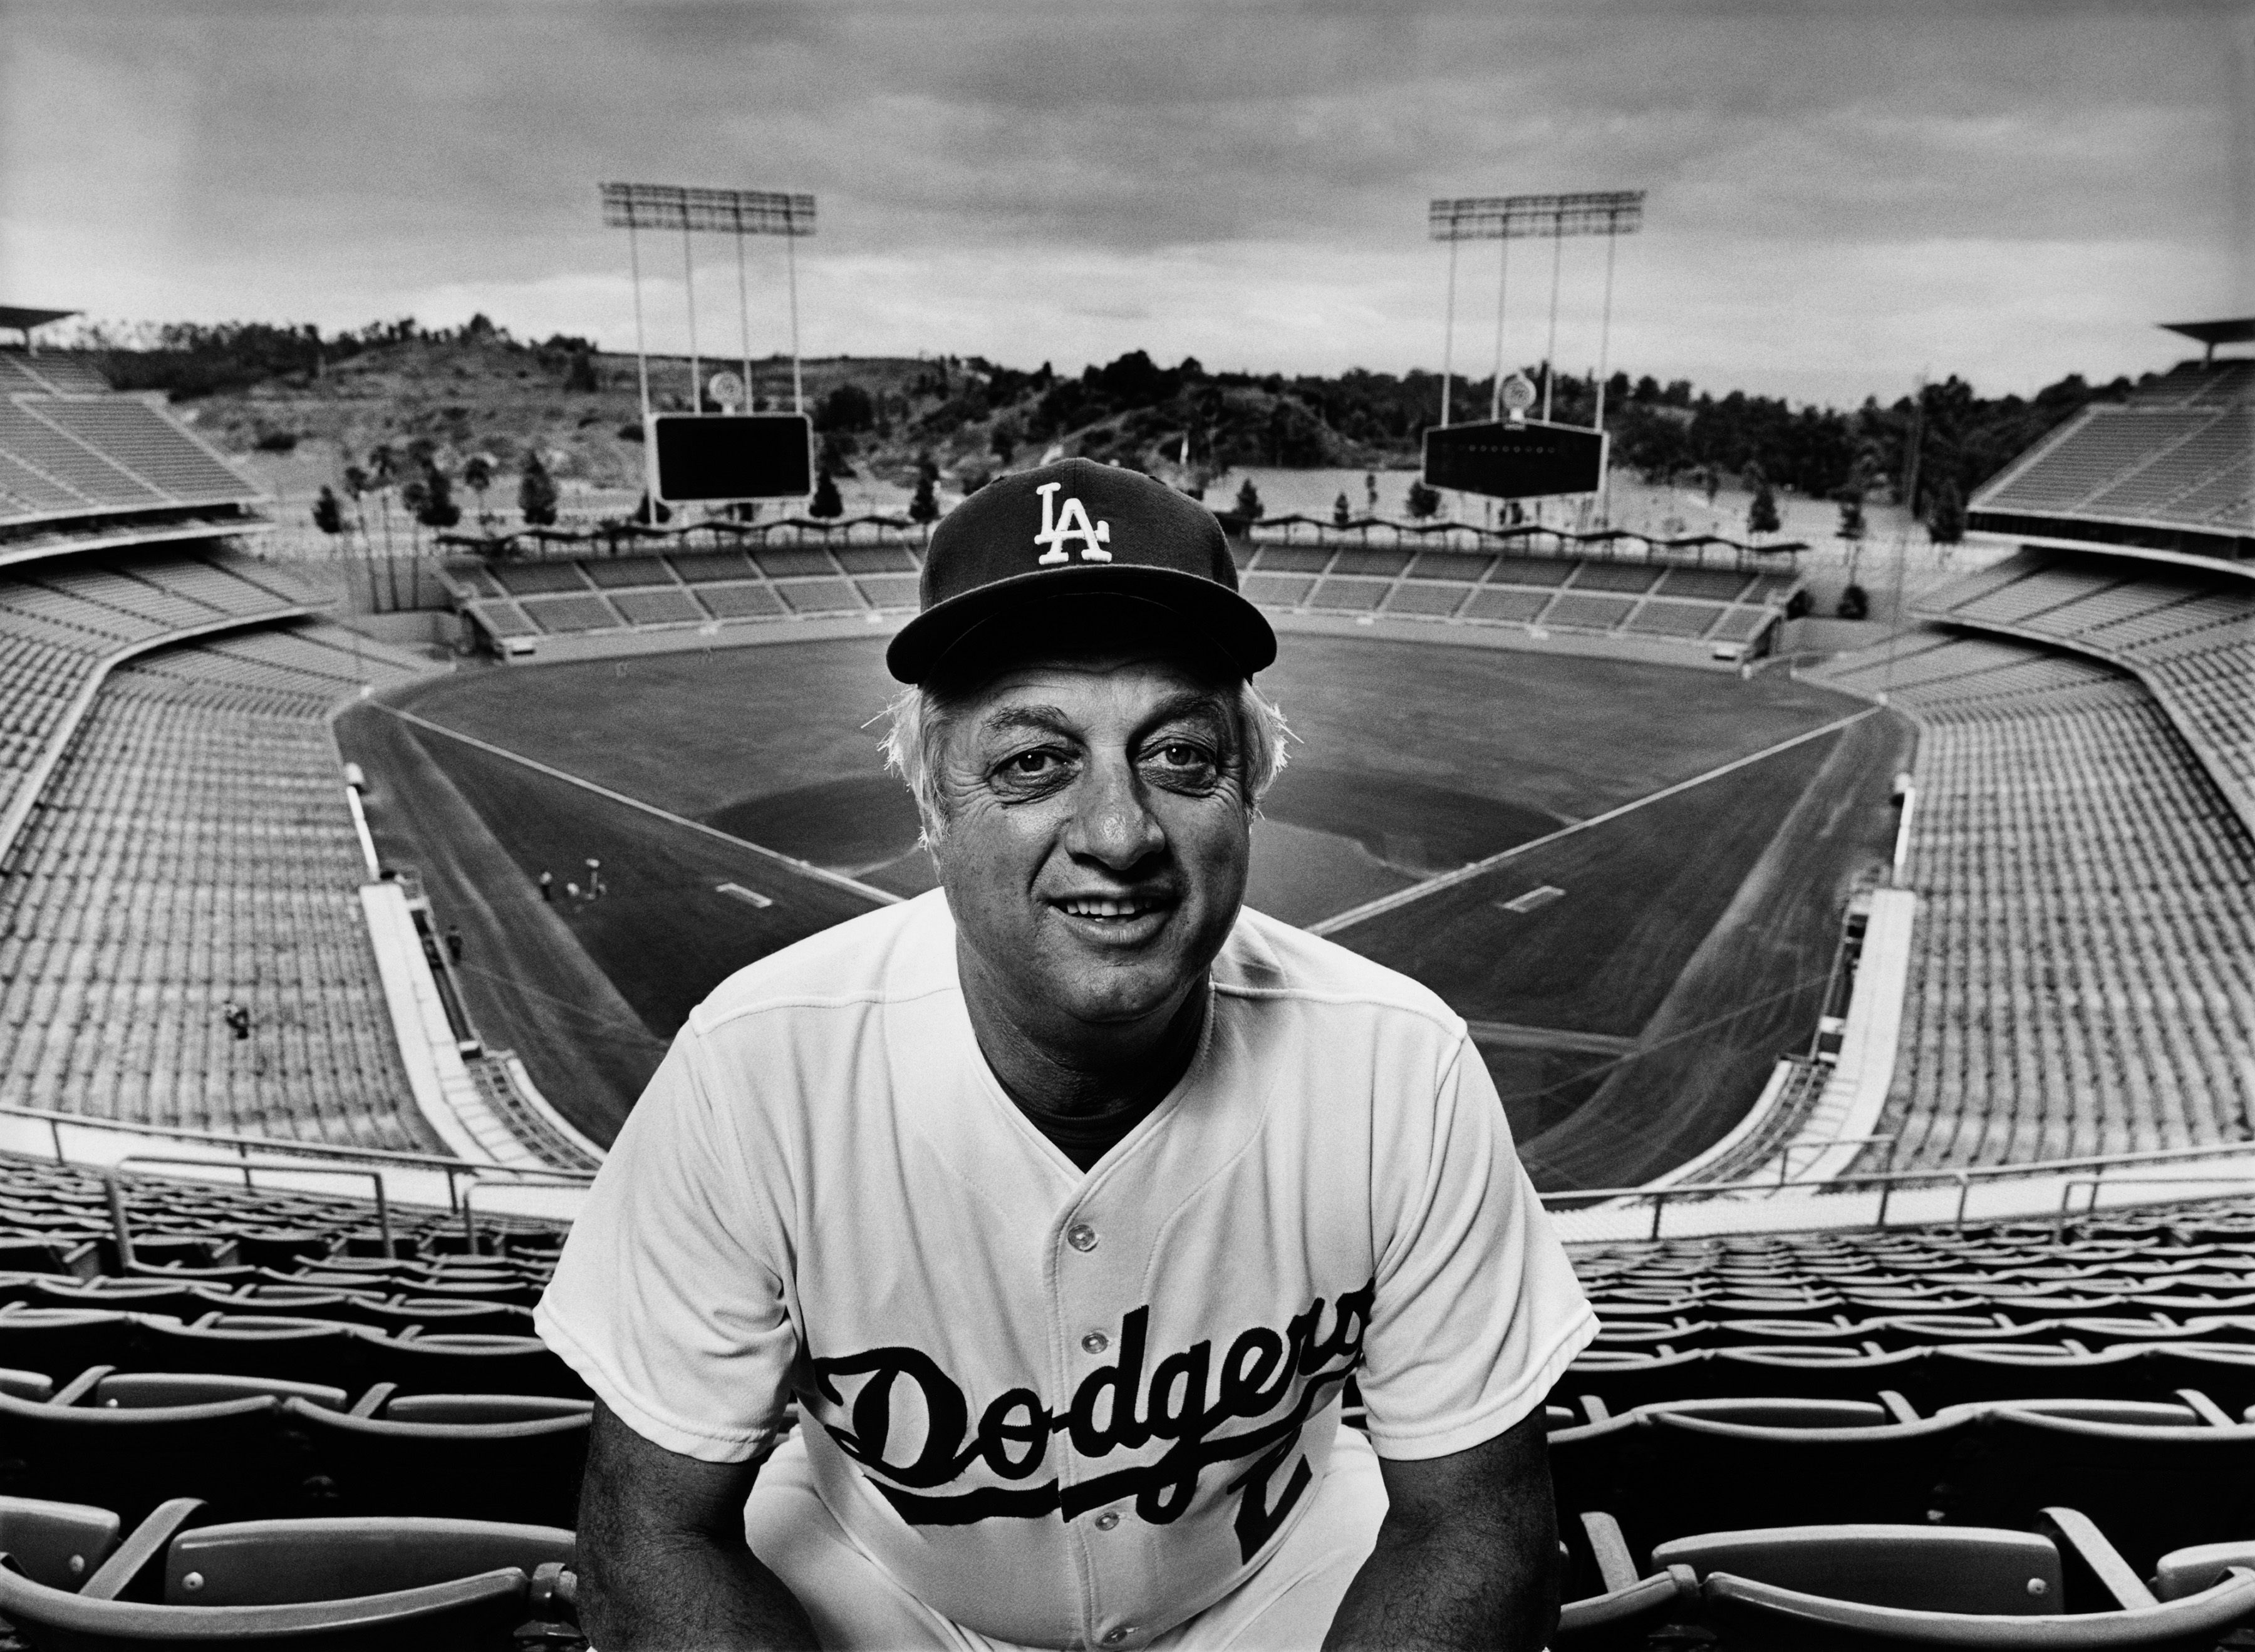 Tommy Lasorda, Hall of Fame manager and LA Dodgers icon, dies aged